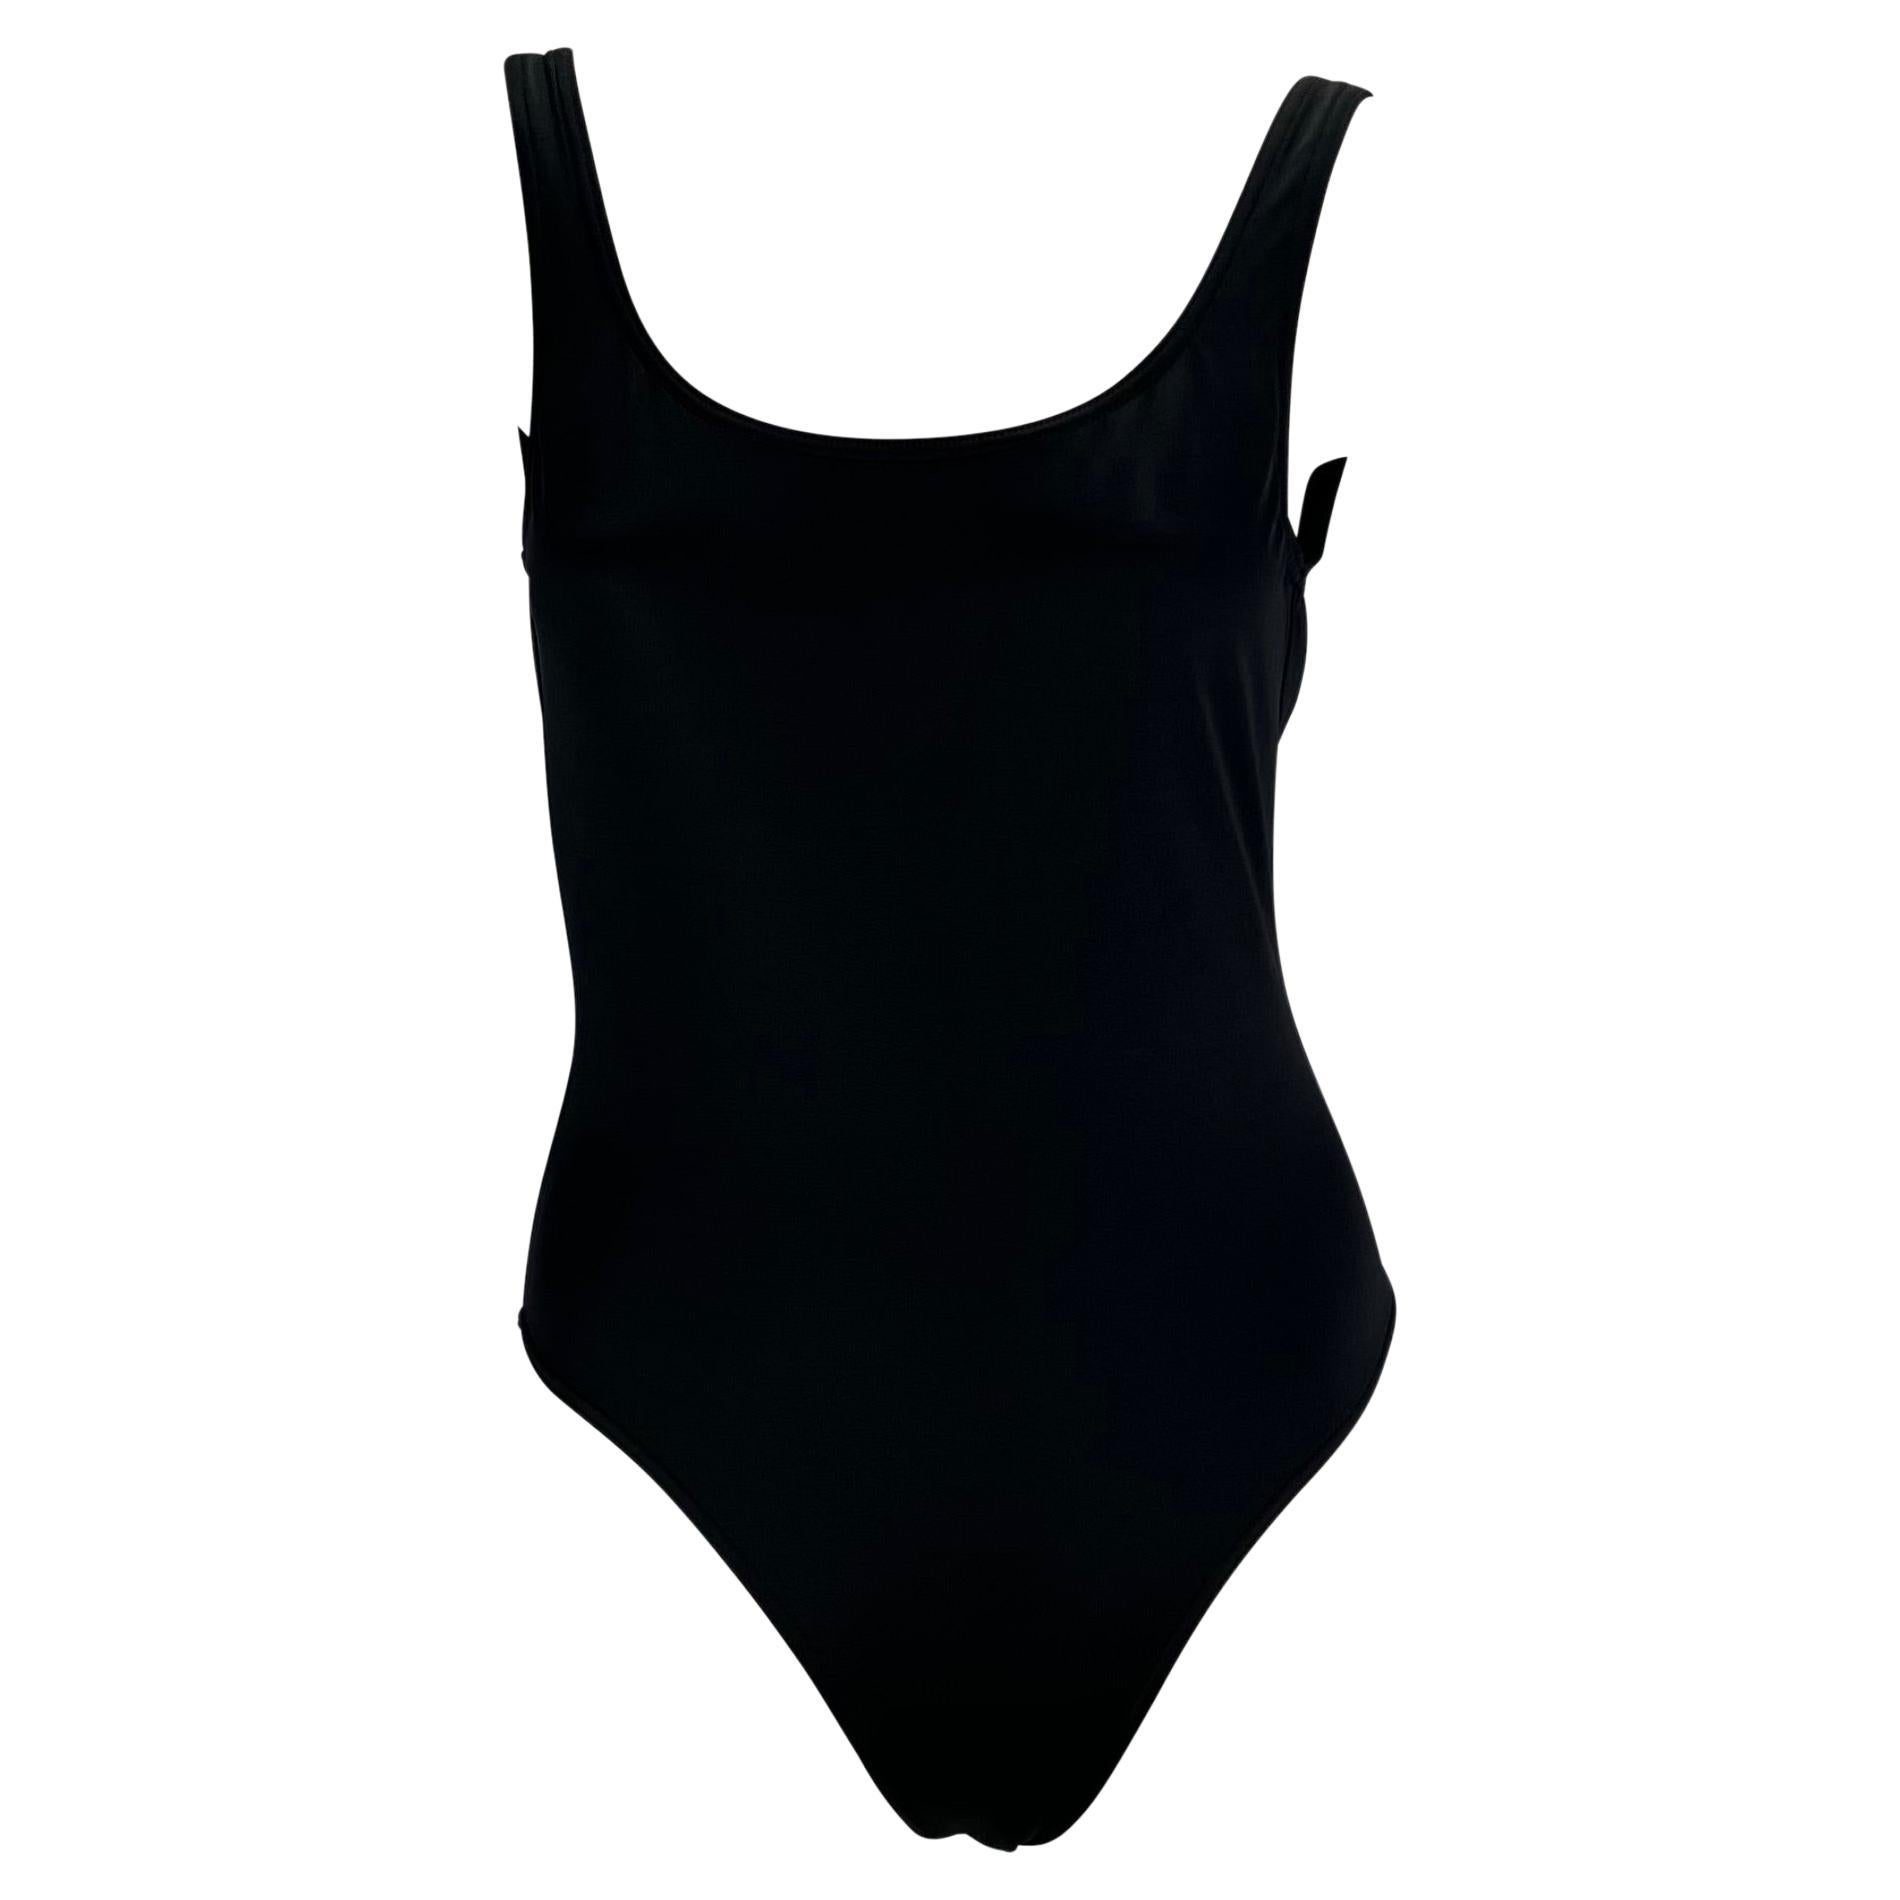 Black S/S 1999 Gucci by Tom Ford Navy One Piece Swimsuit Leotard